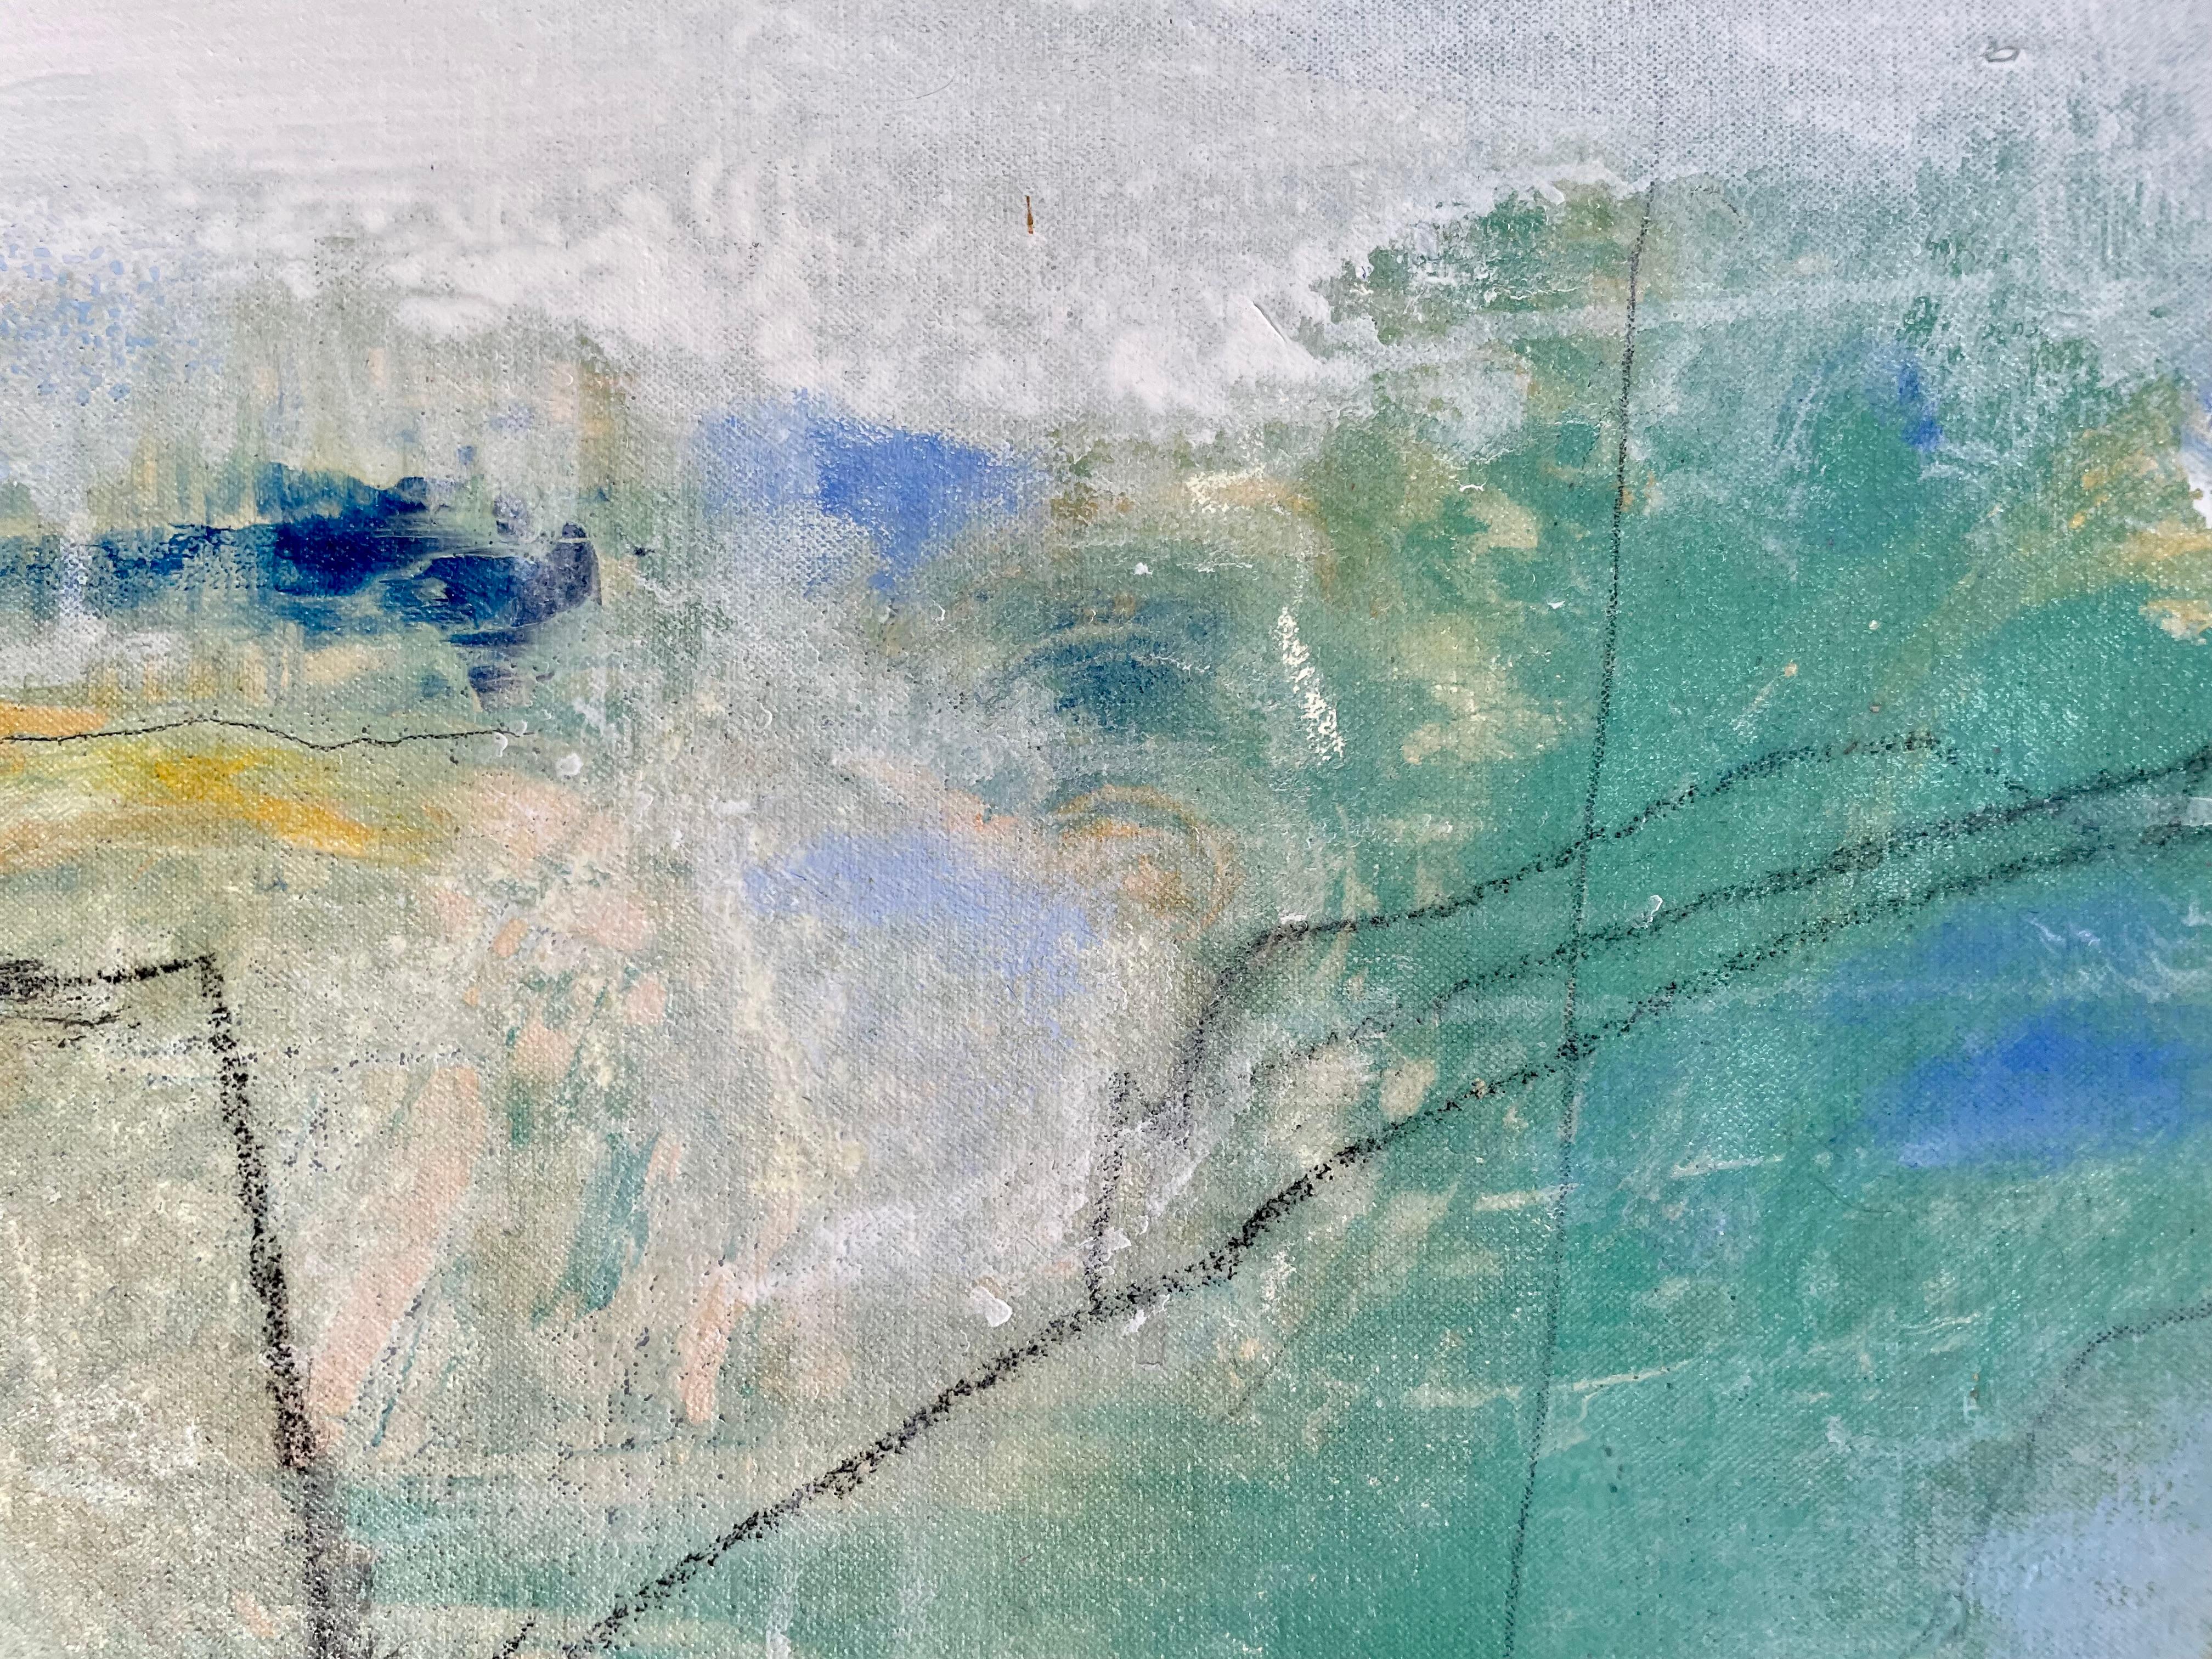 Michele Zuzalek
Large modern expressive abstract painting has ocean colors in seagrass blue, turquoise blue, sand, cream, gray, and white.
Titled: Changing Tides
My painting is inspired by my connection to the sea and nature dominates my work. This